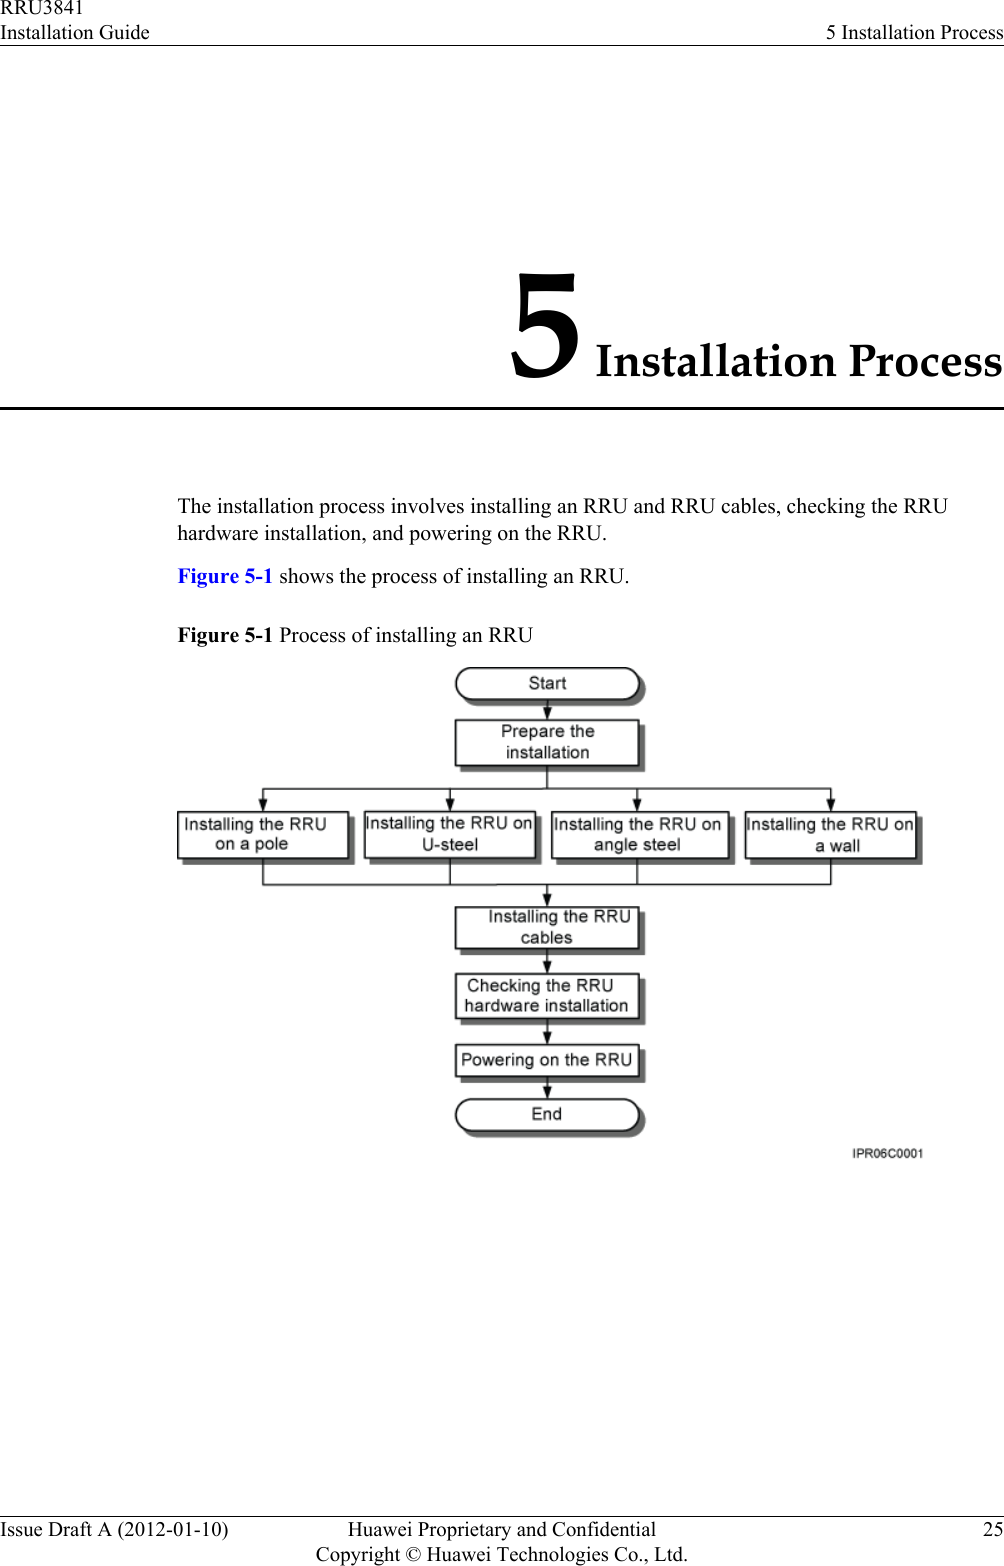 5 Installation ProcessThe installation process involves installing an RRU and RRU cables, checking the RRUhardware installation, and powering on the RRU.Figure 5-1 shows the process of installing an RRU.Figure 5-1 Process of installing an RRU RRU3841Installation Guide 5 Installation ProcessIssue Draft A (2012-01-10) Huawei Proprietary and ConfidentialCopyright © Huawei Technologies Co., Ltd.25